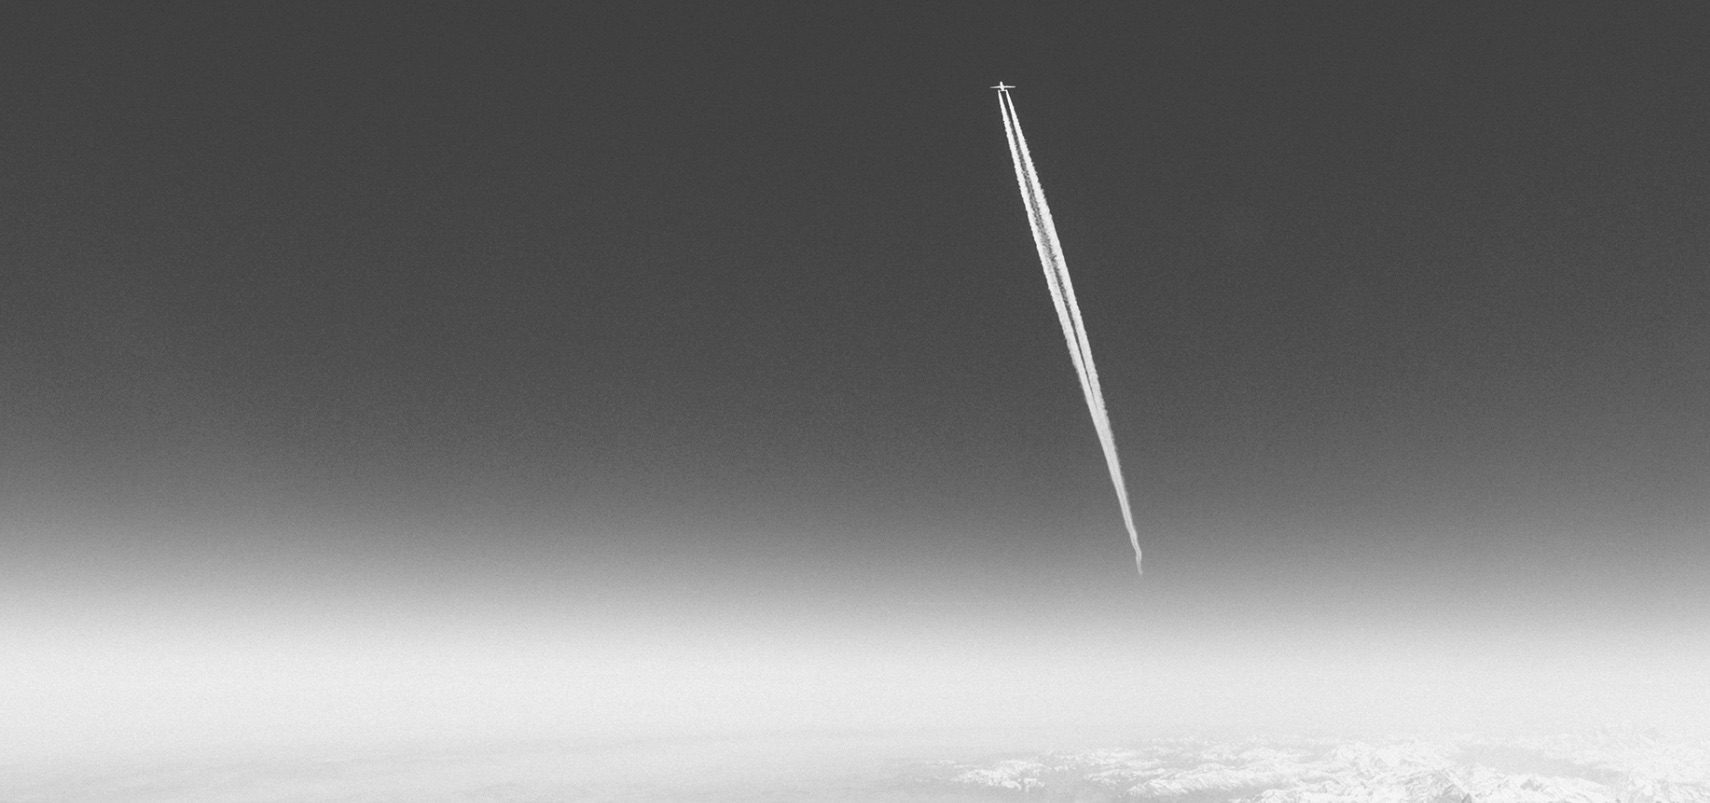 Photograph of airplane and contrail far up in the sky